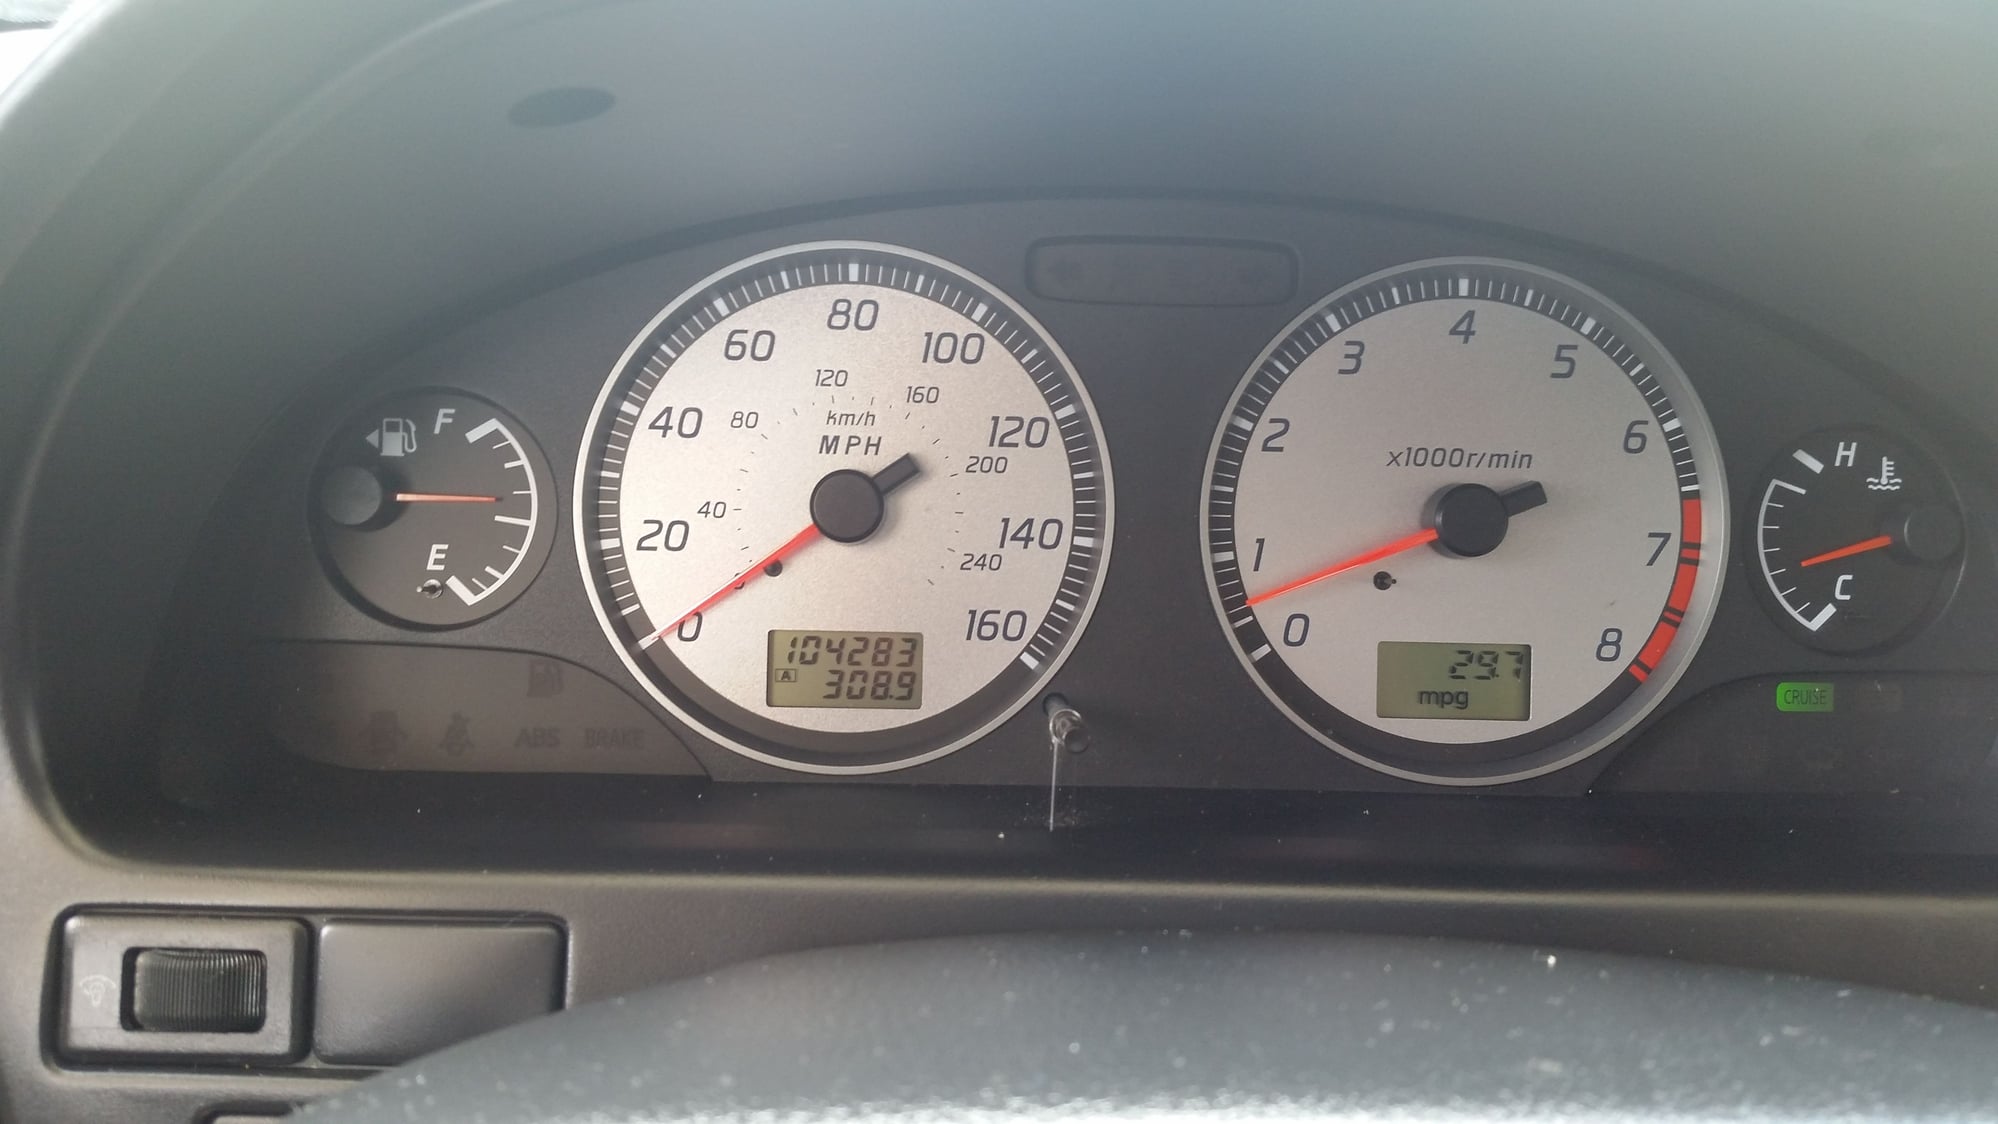 Nissan Maxima 2000-2003 problems, engine, fuel economy, driving experience